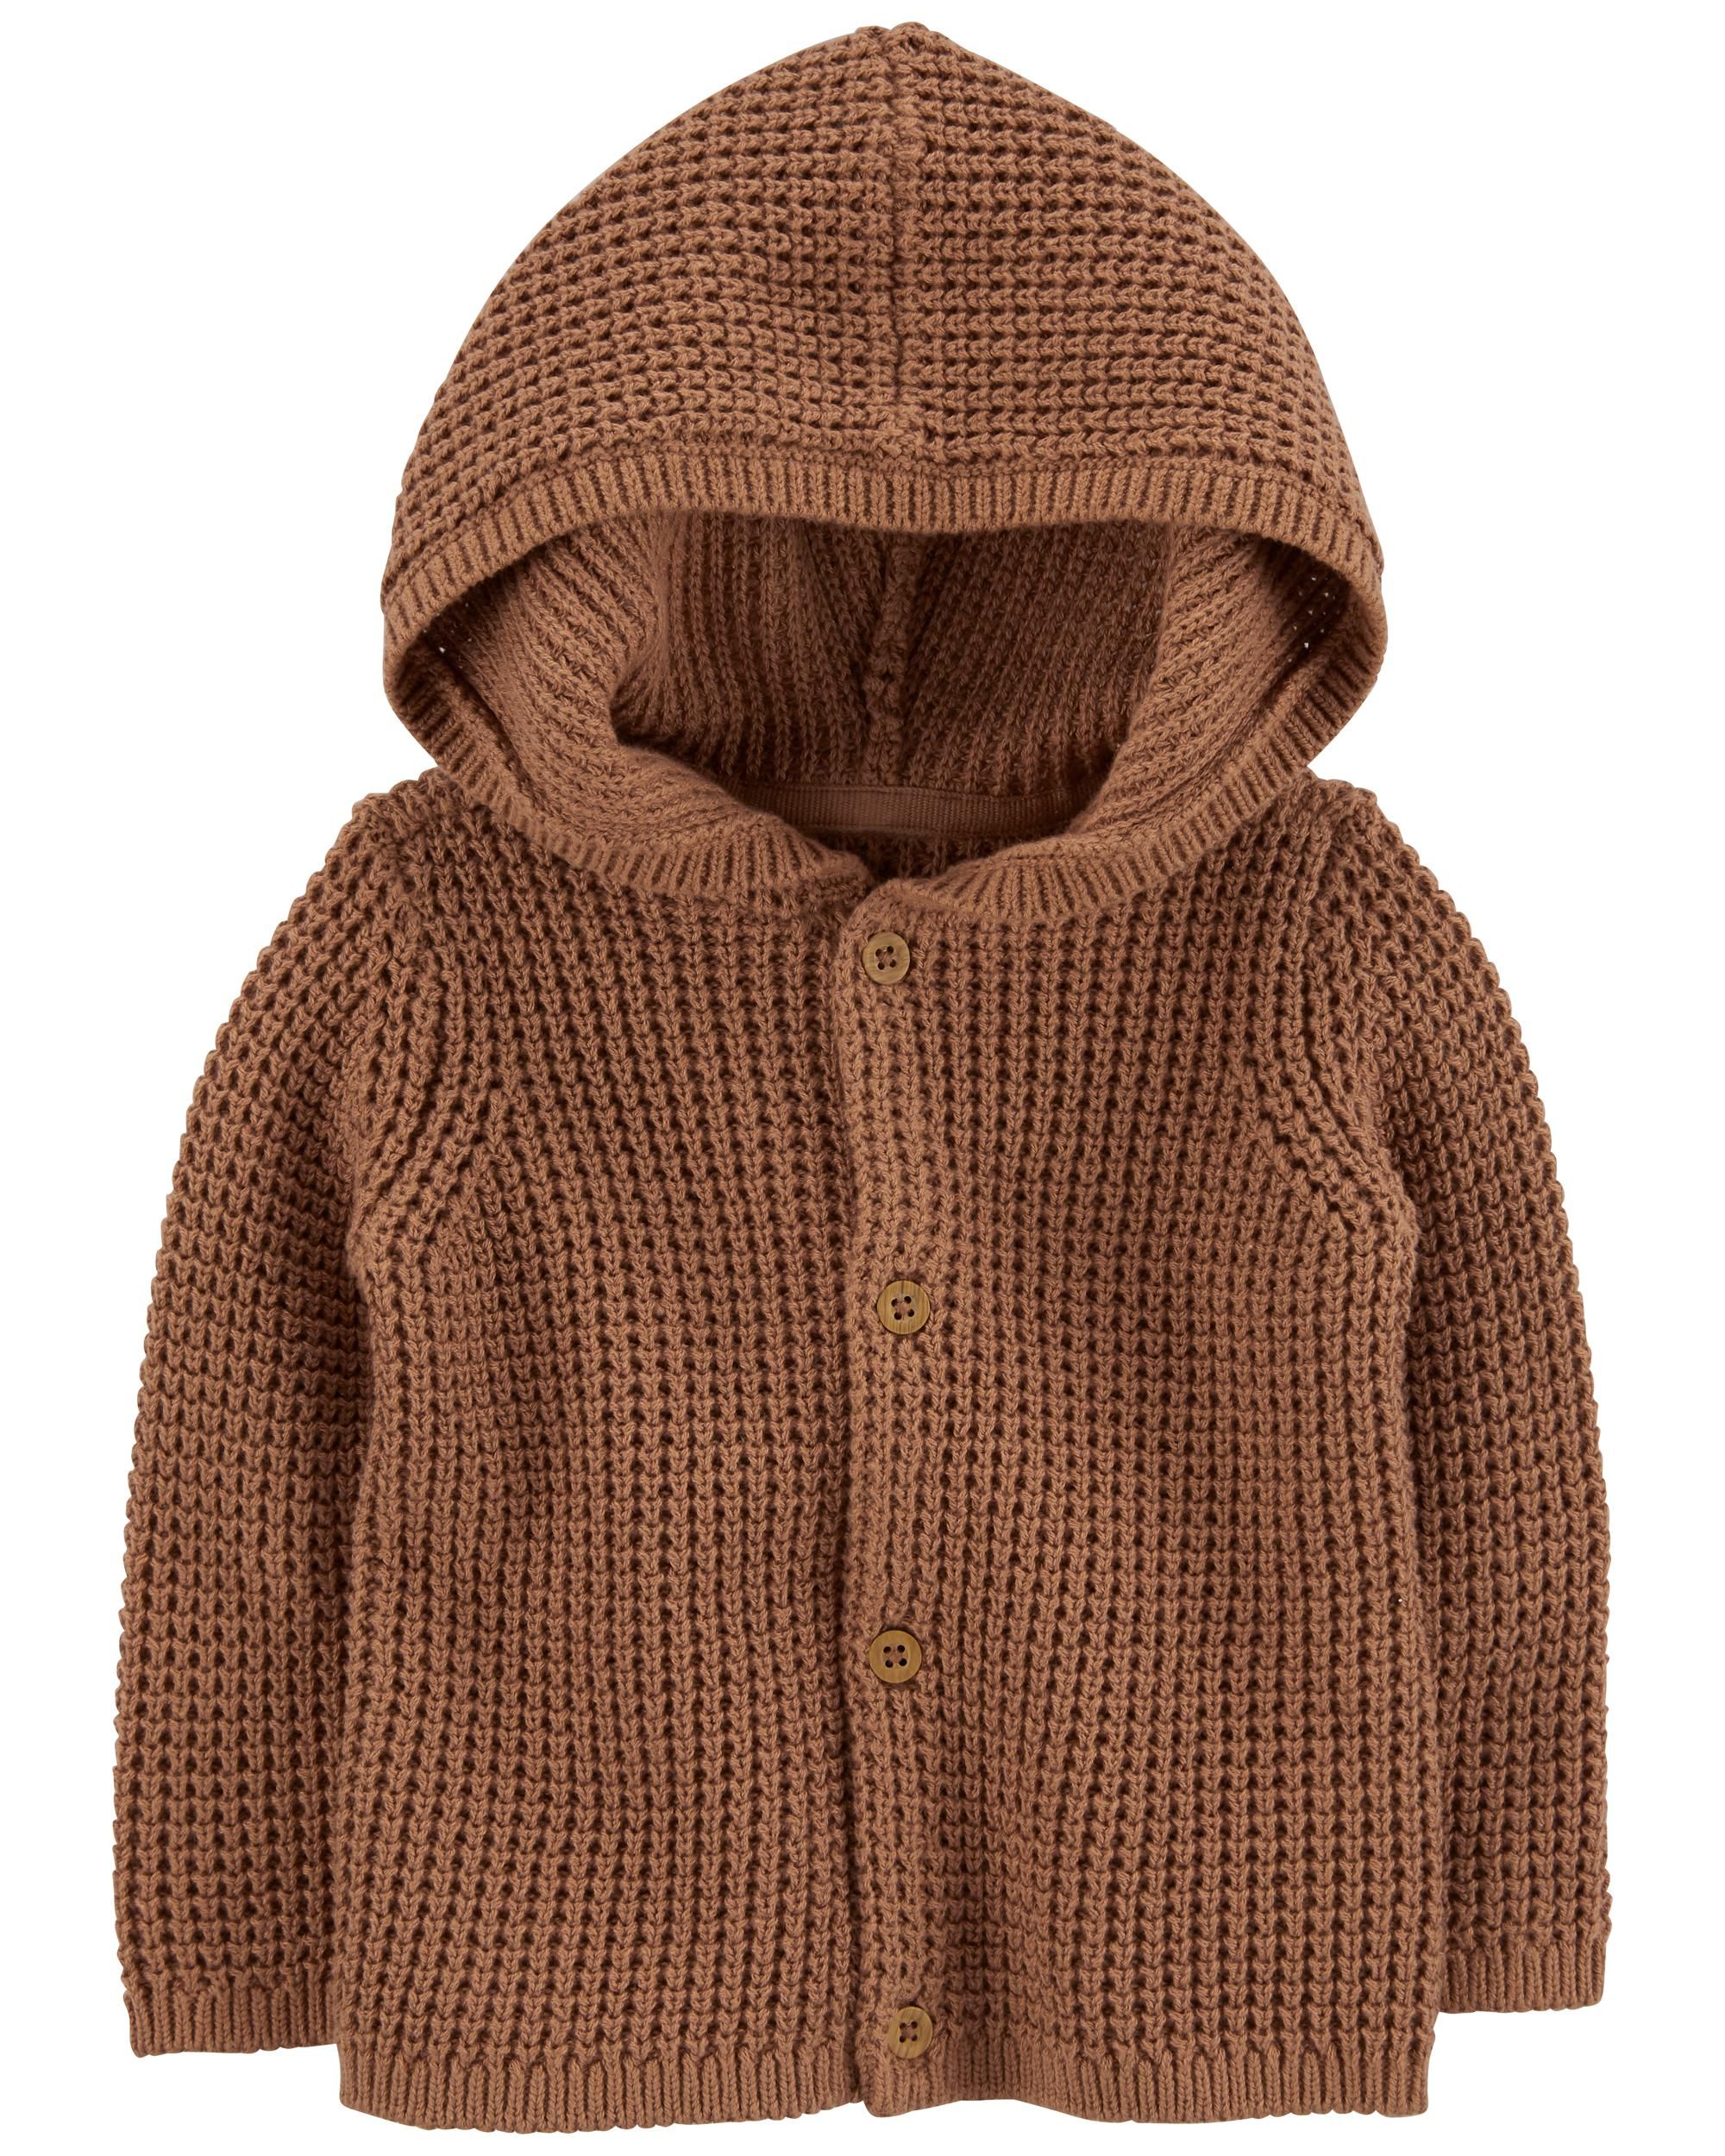 Baby Hooded Cardigan | Carter's